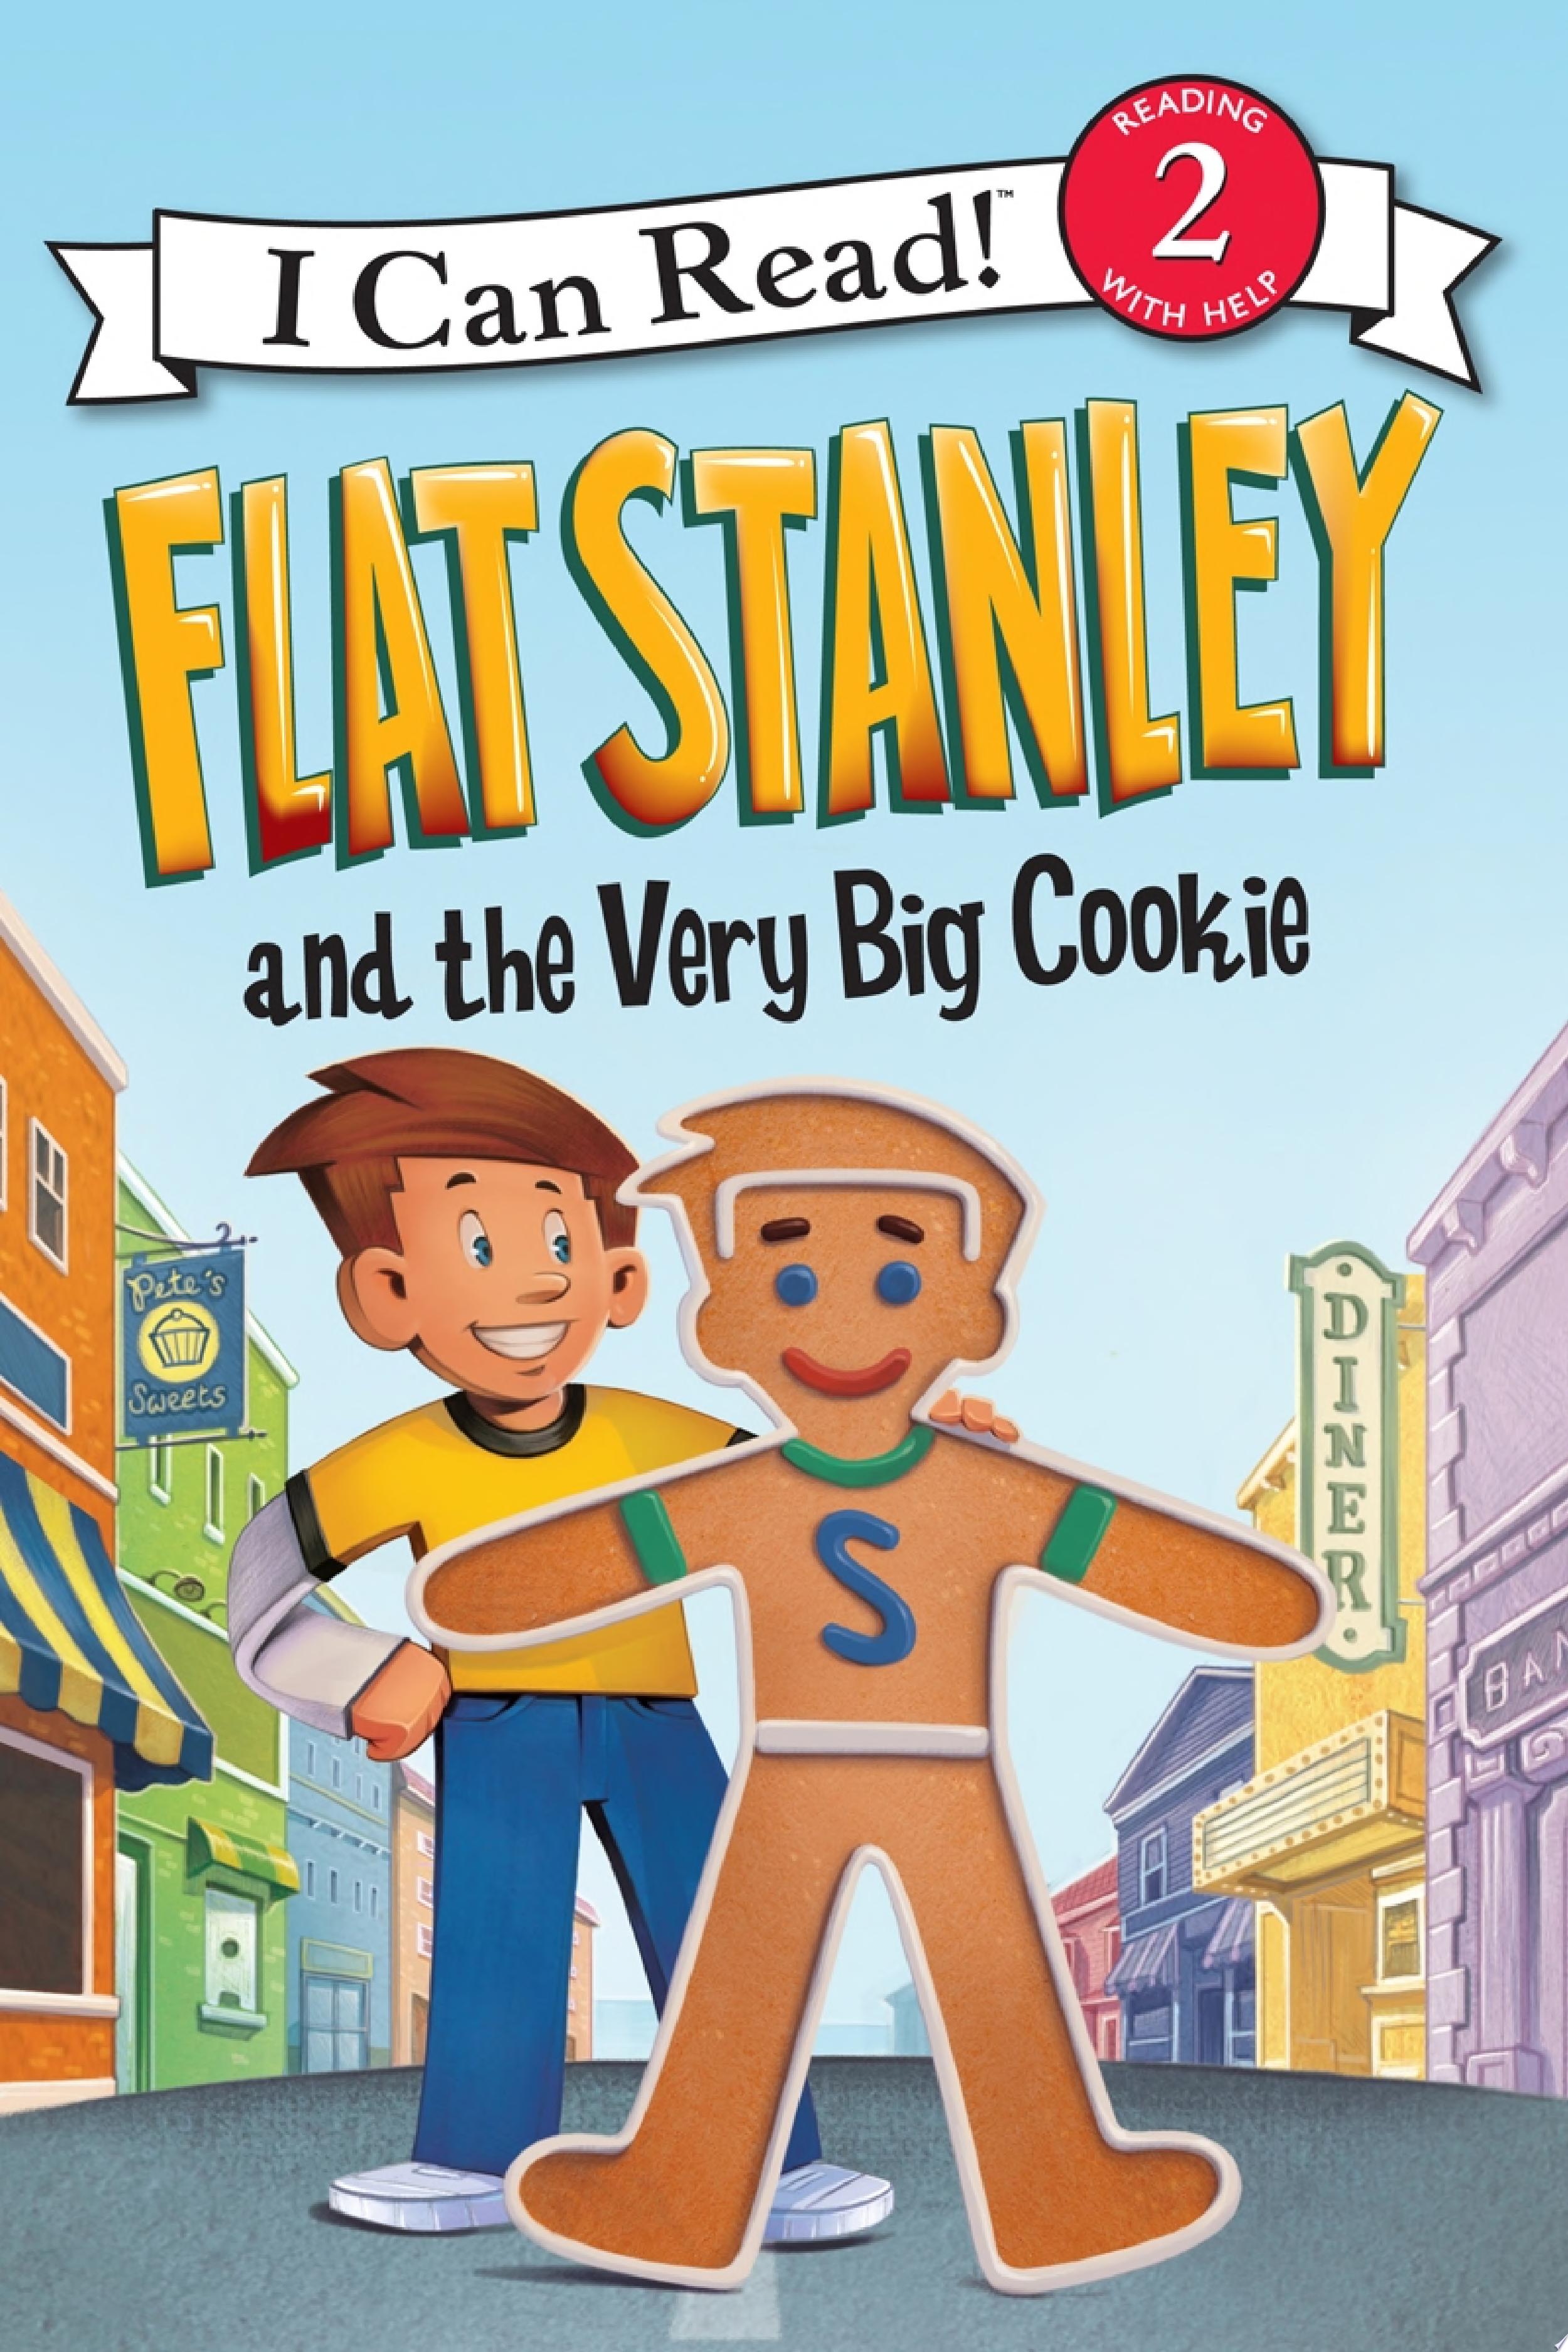 Image for "Flat Stanley and the Very Big Cookie"